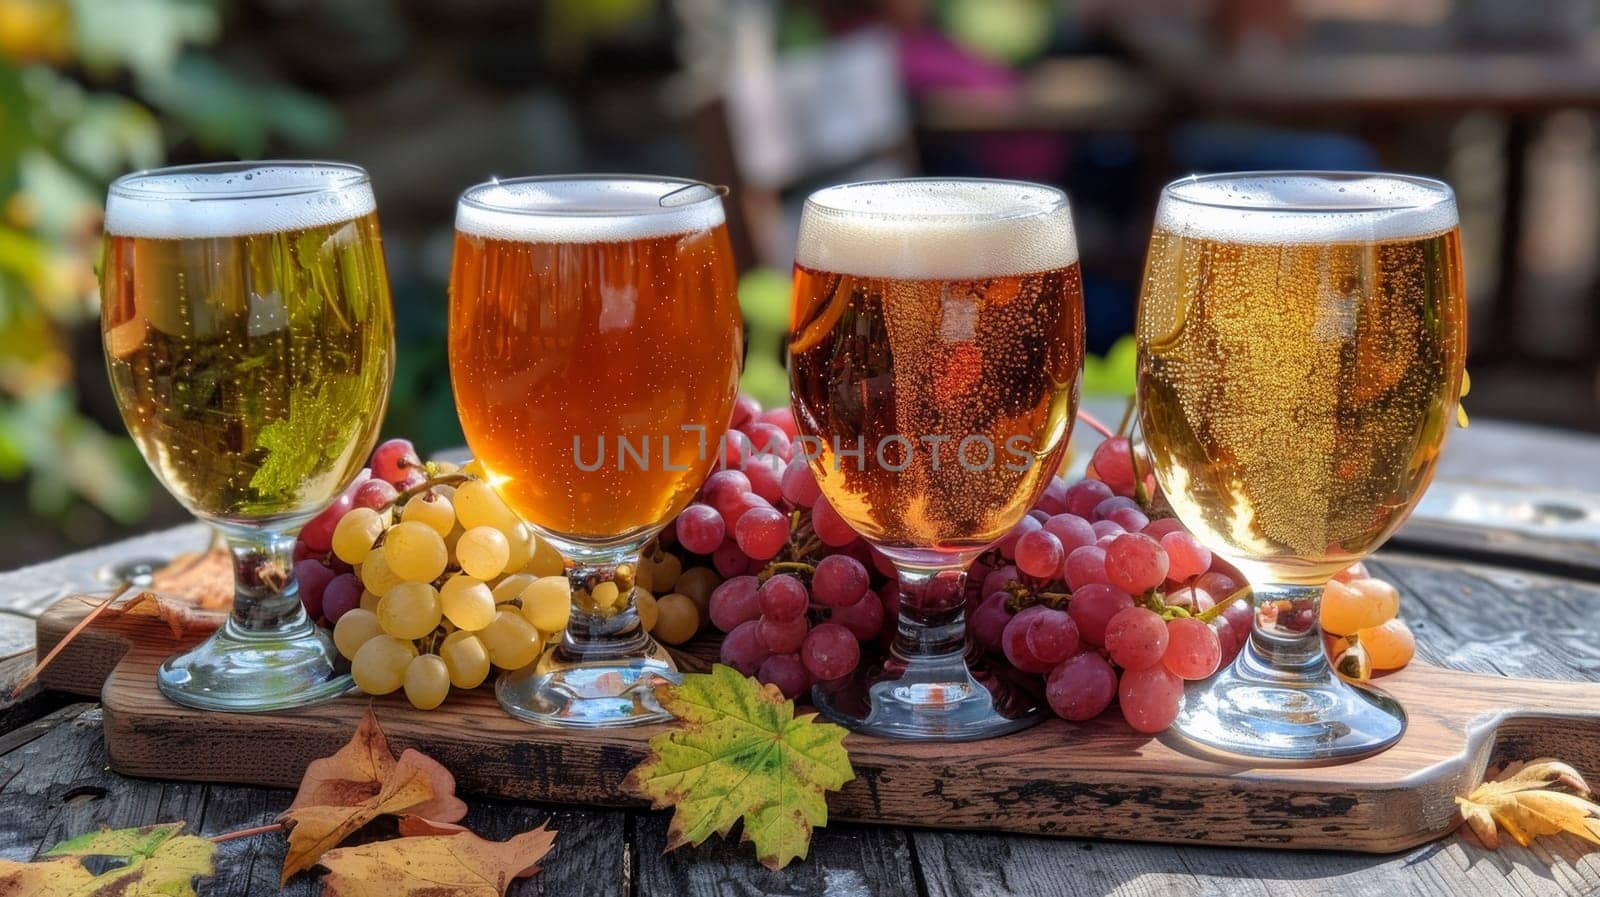 Three glasses of beer are sitting on a wooden tray with grapes and leaves, AI by starush